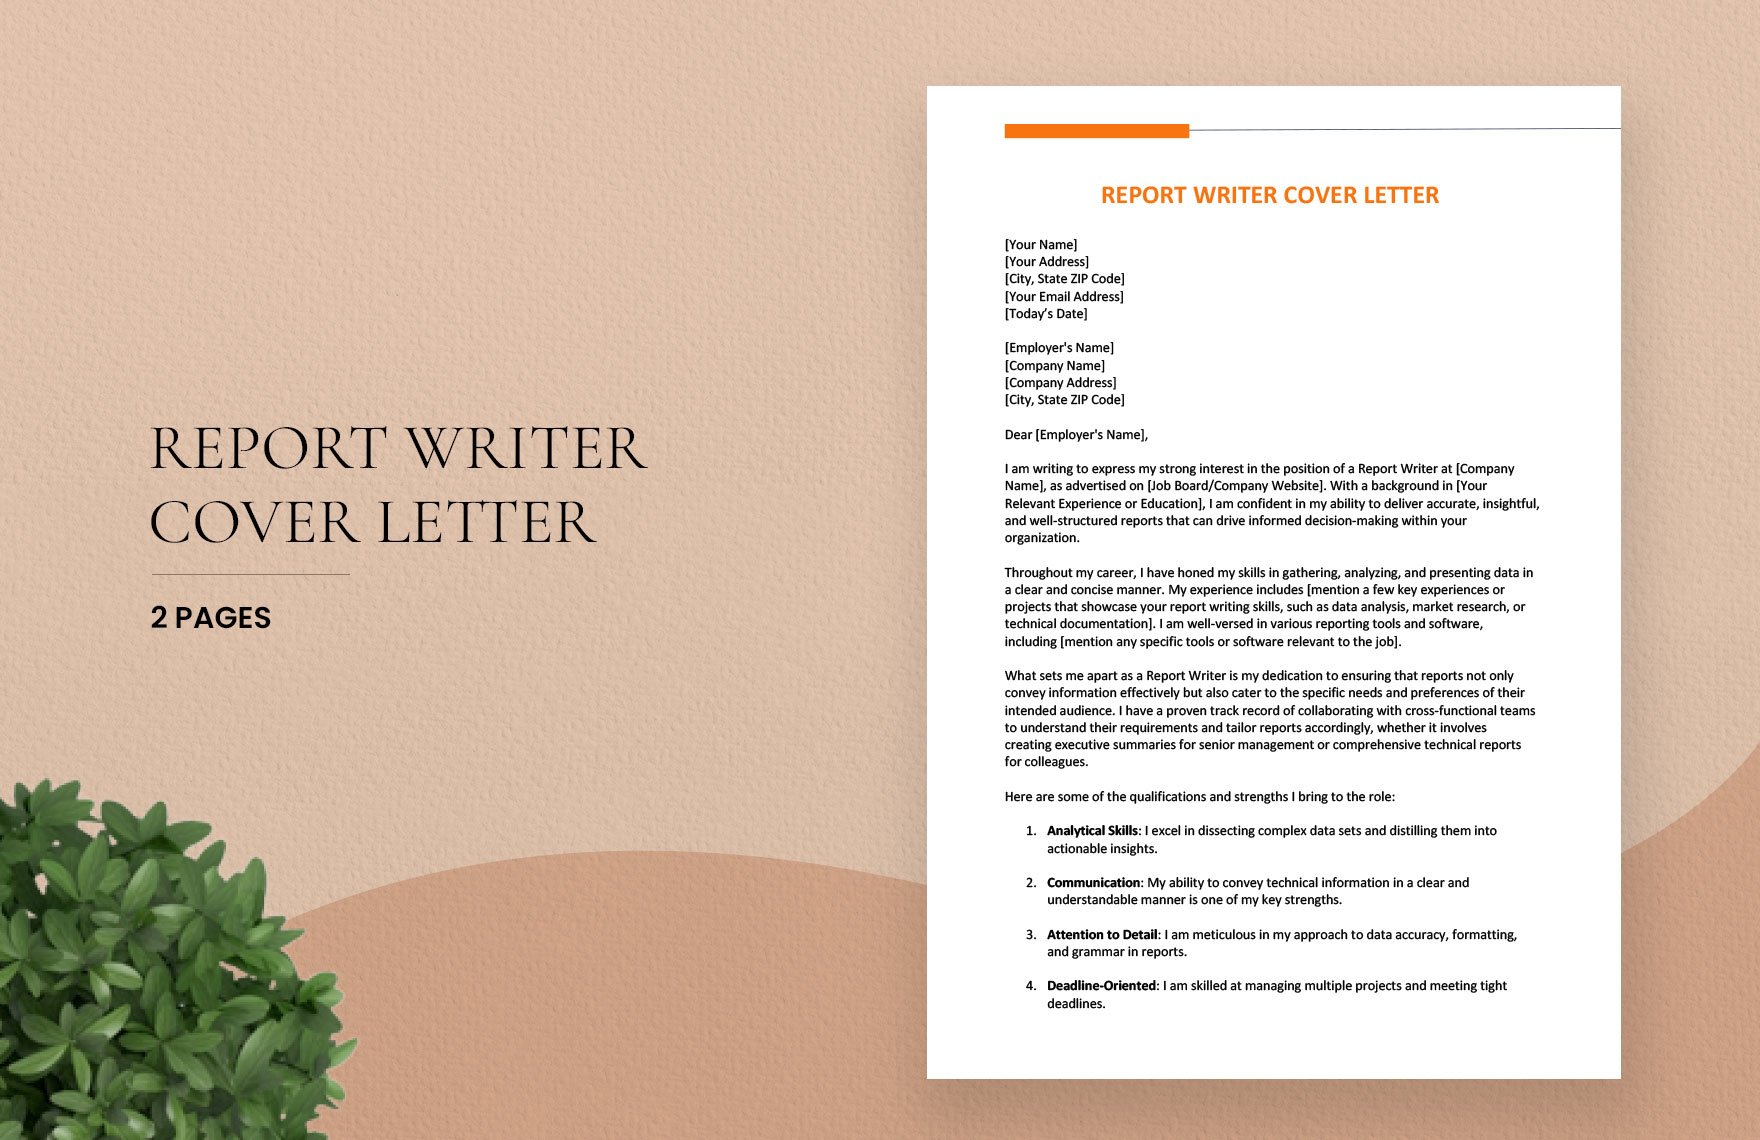 Report Writer Cover Letter in Word, Google Docs